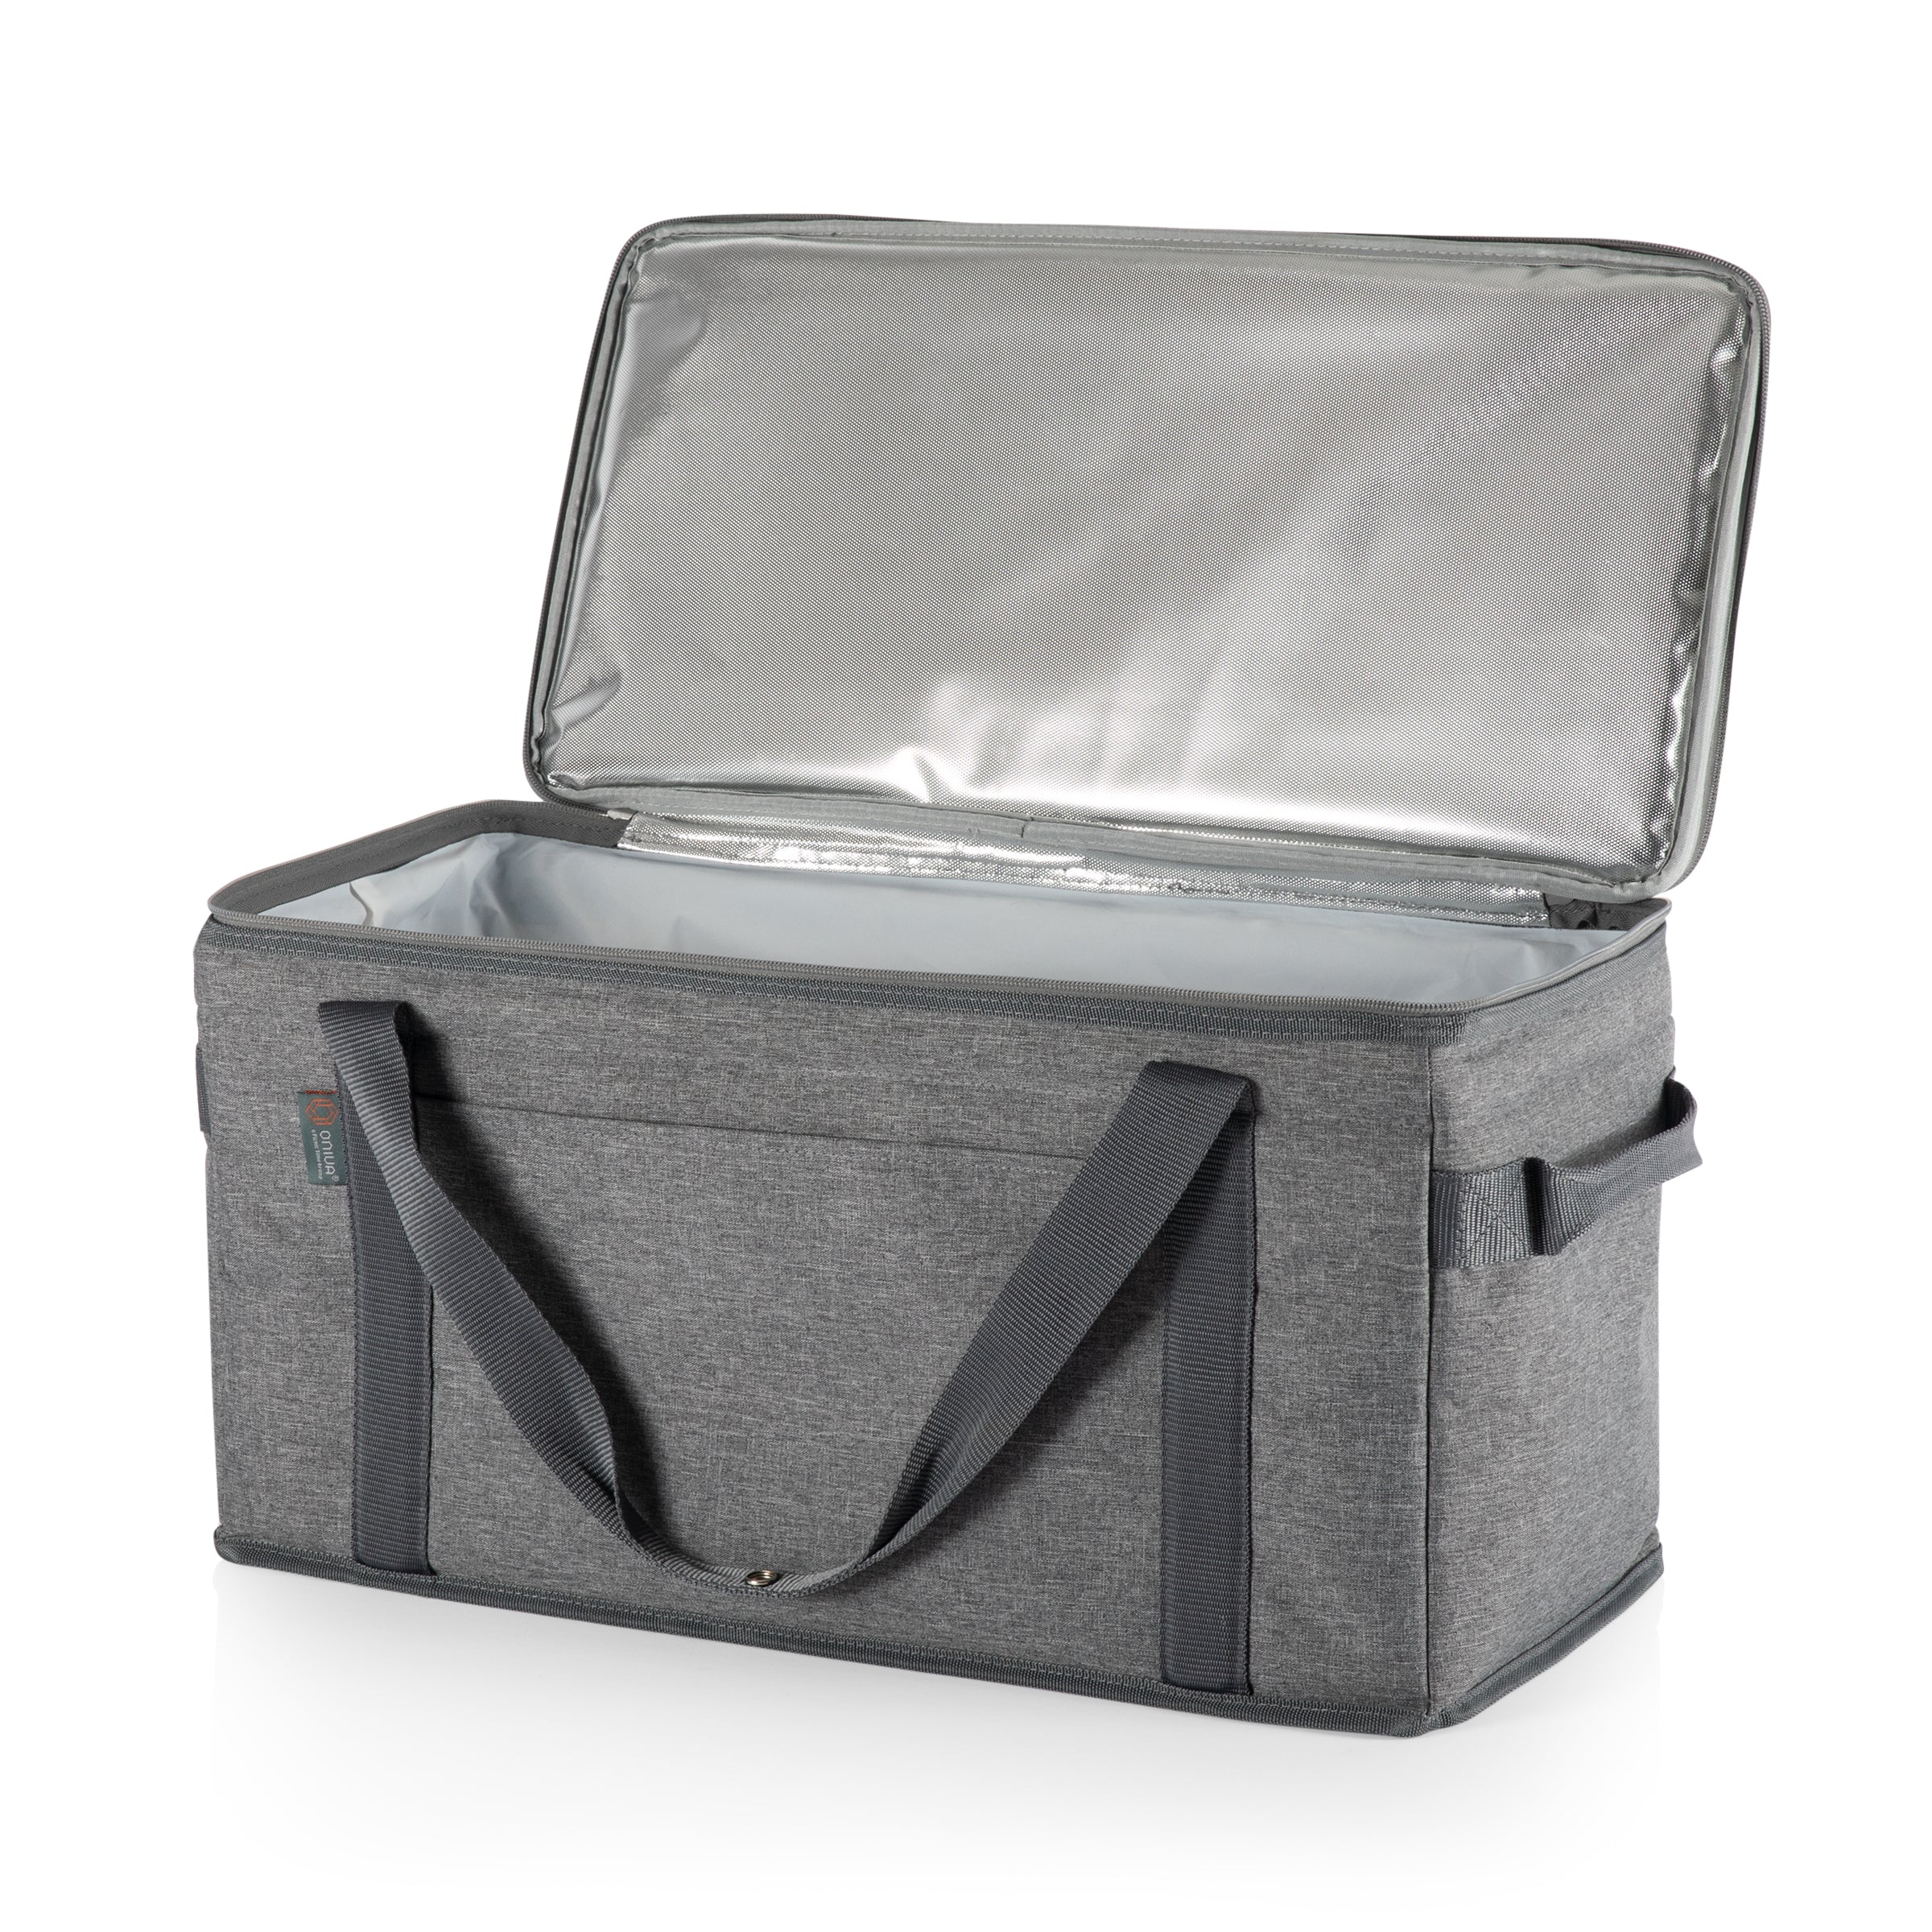 Los Angeles Kings - 64 Can Collapsible Cooler